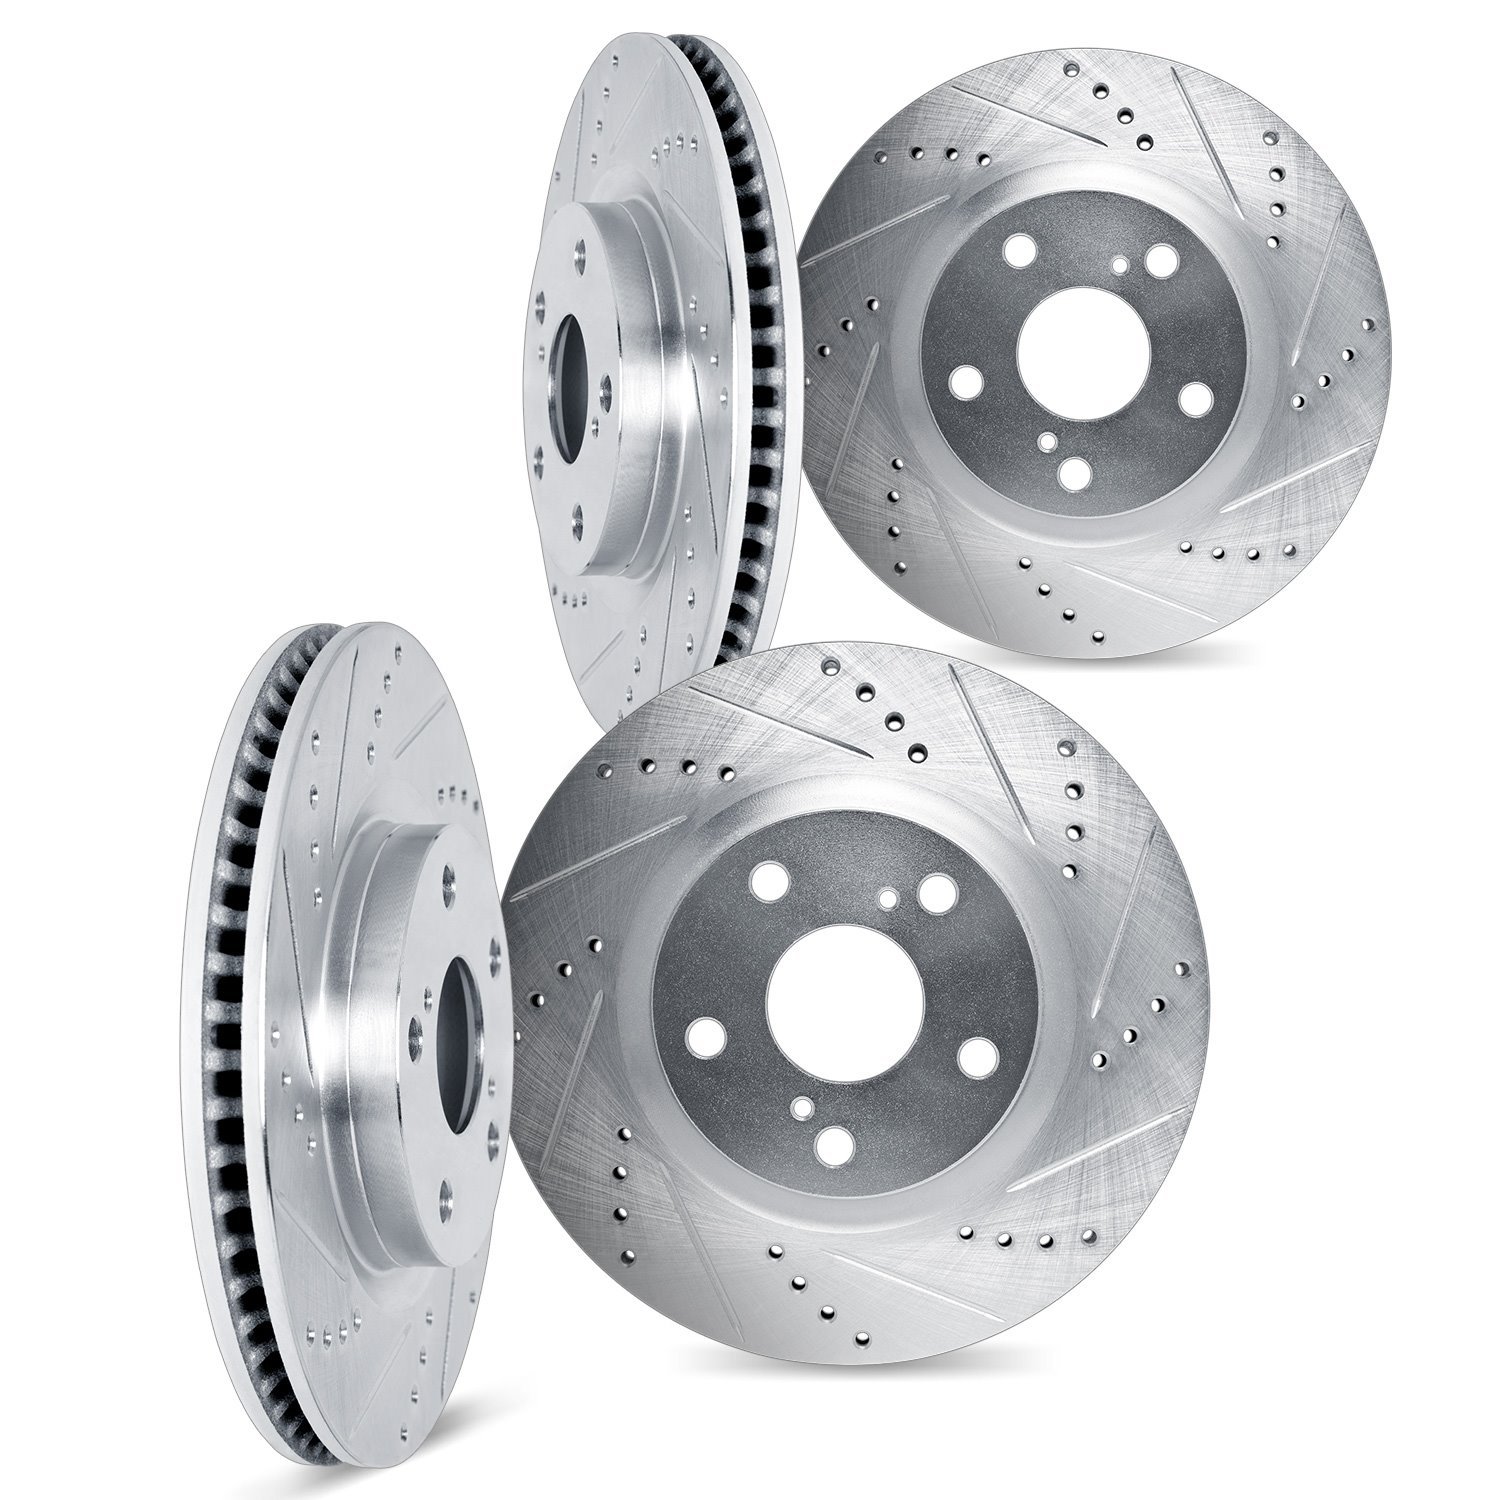 7004-67084 Drilled/Slotted Brake Rotors [Silver], Fits Select Multiple Makes/Models, Position: Front and Rear